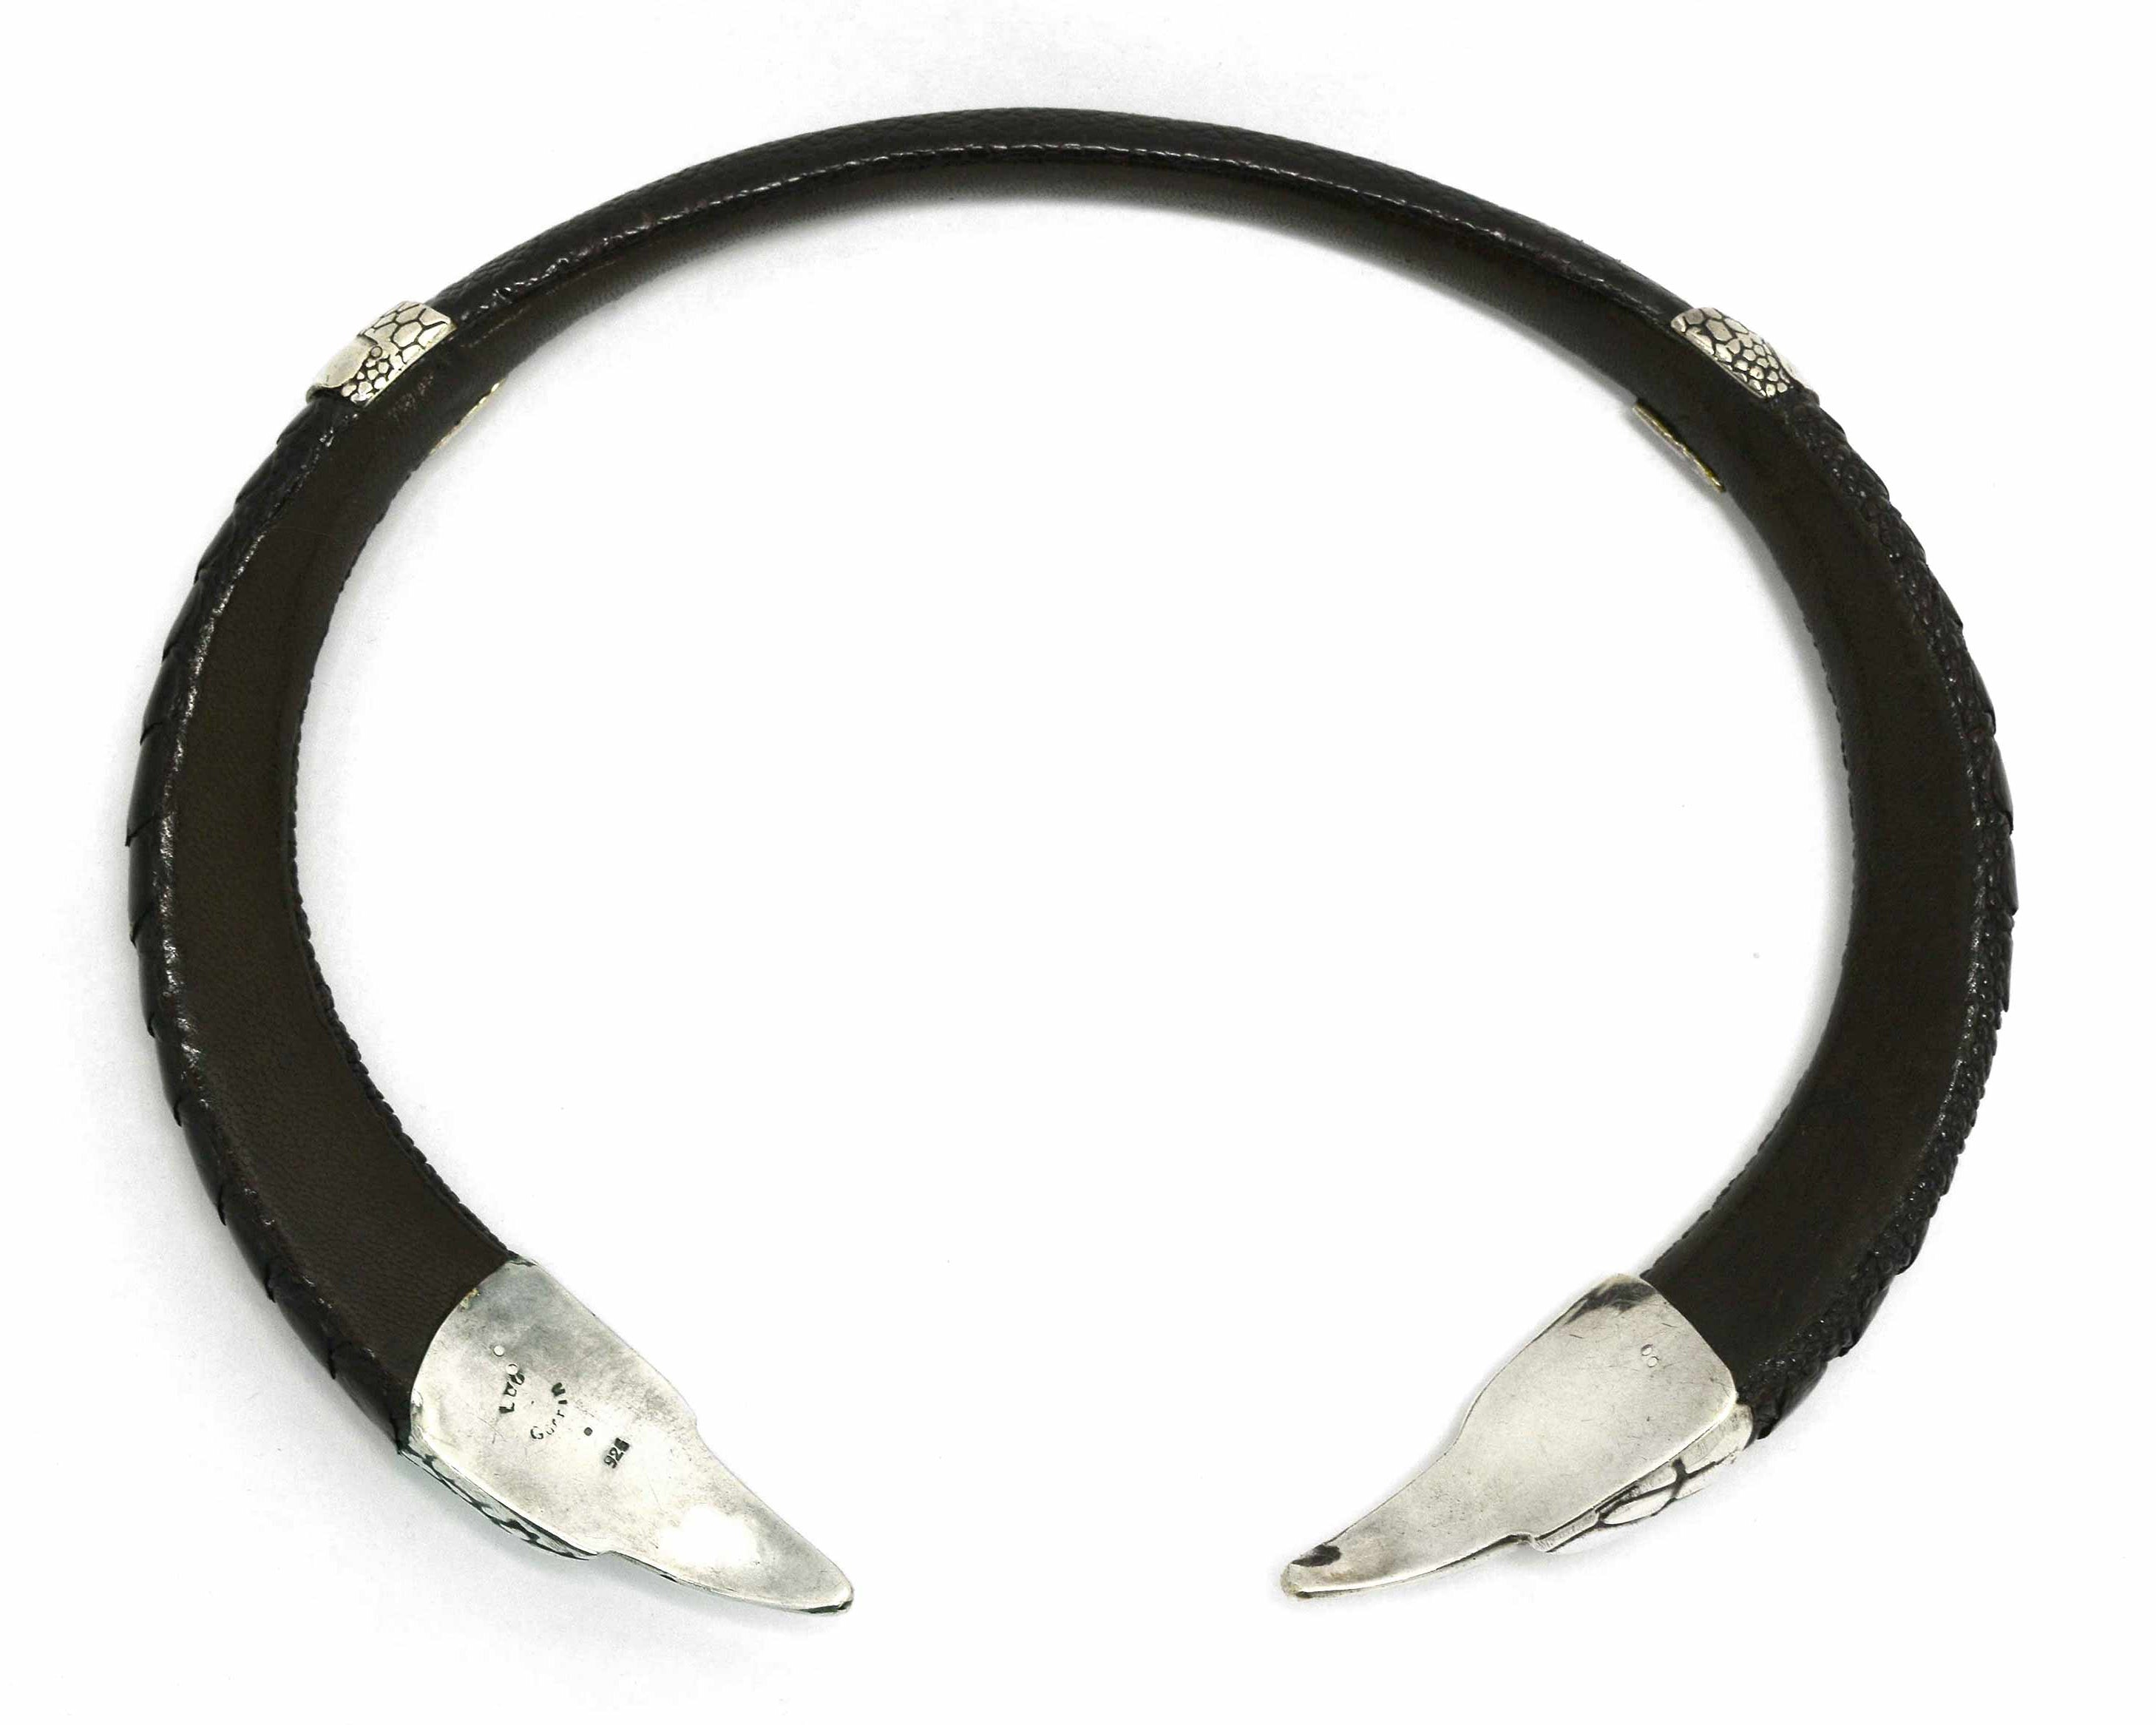 A new, handmade sterling silver and black leather statement necklace.